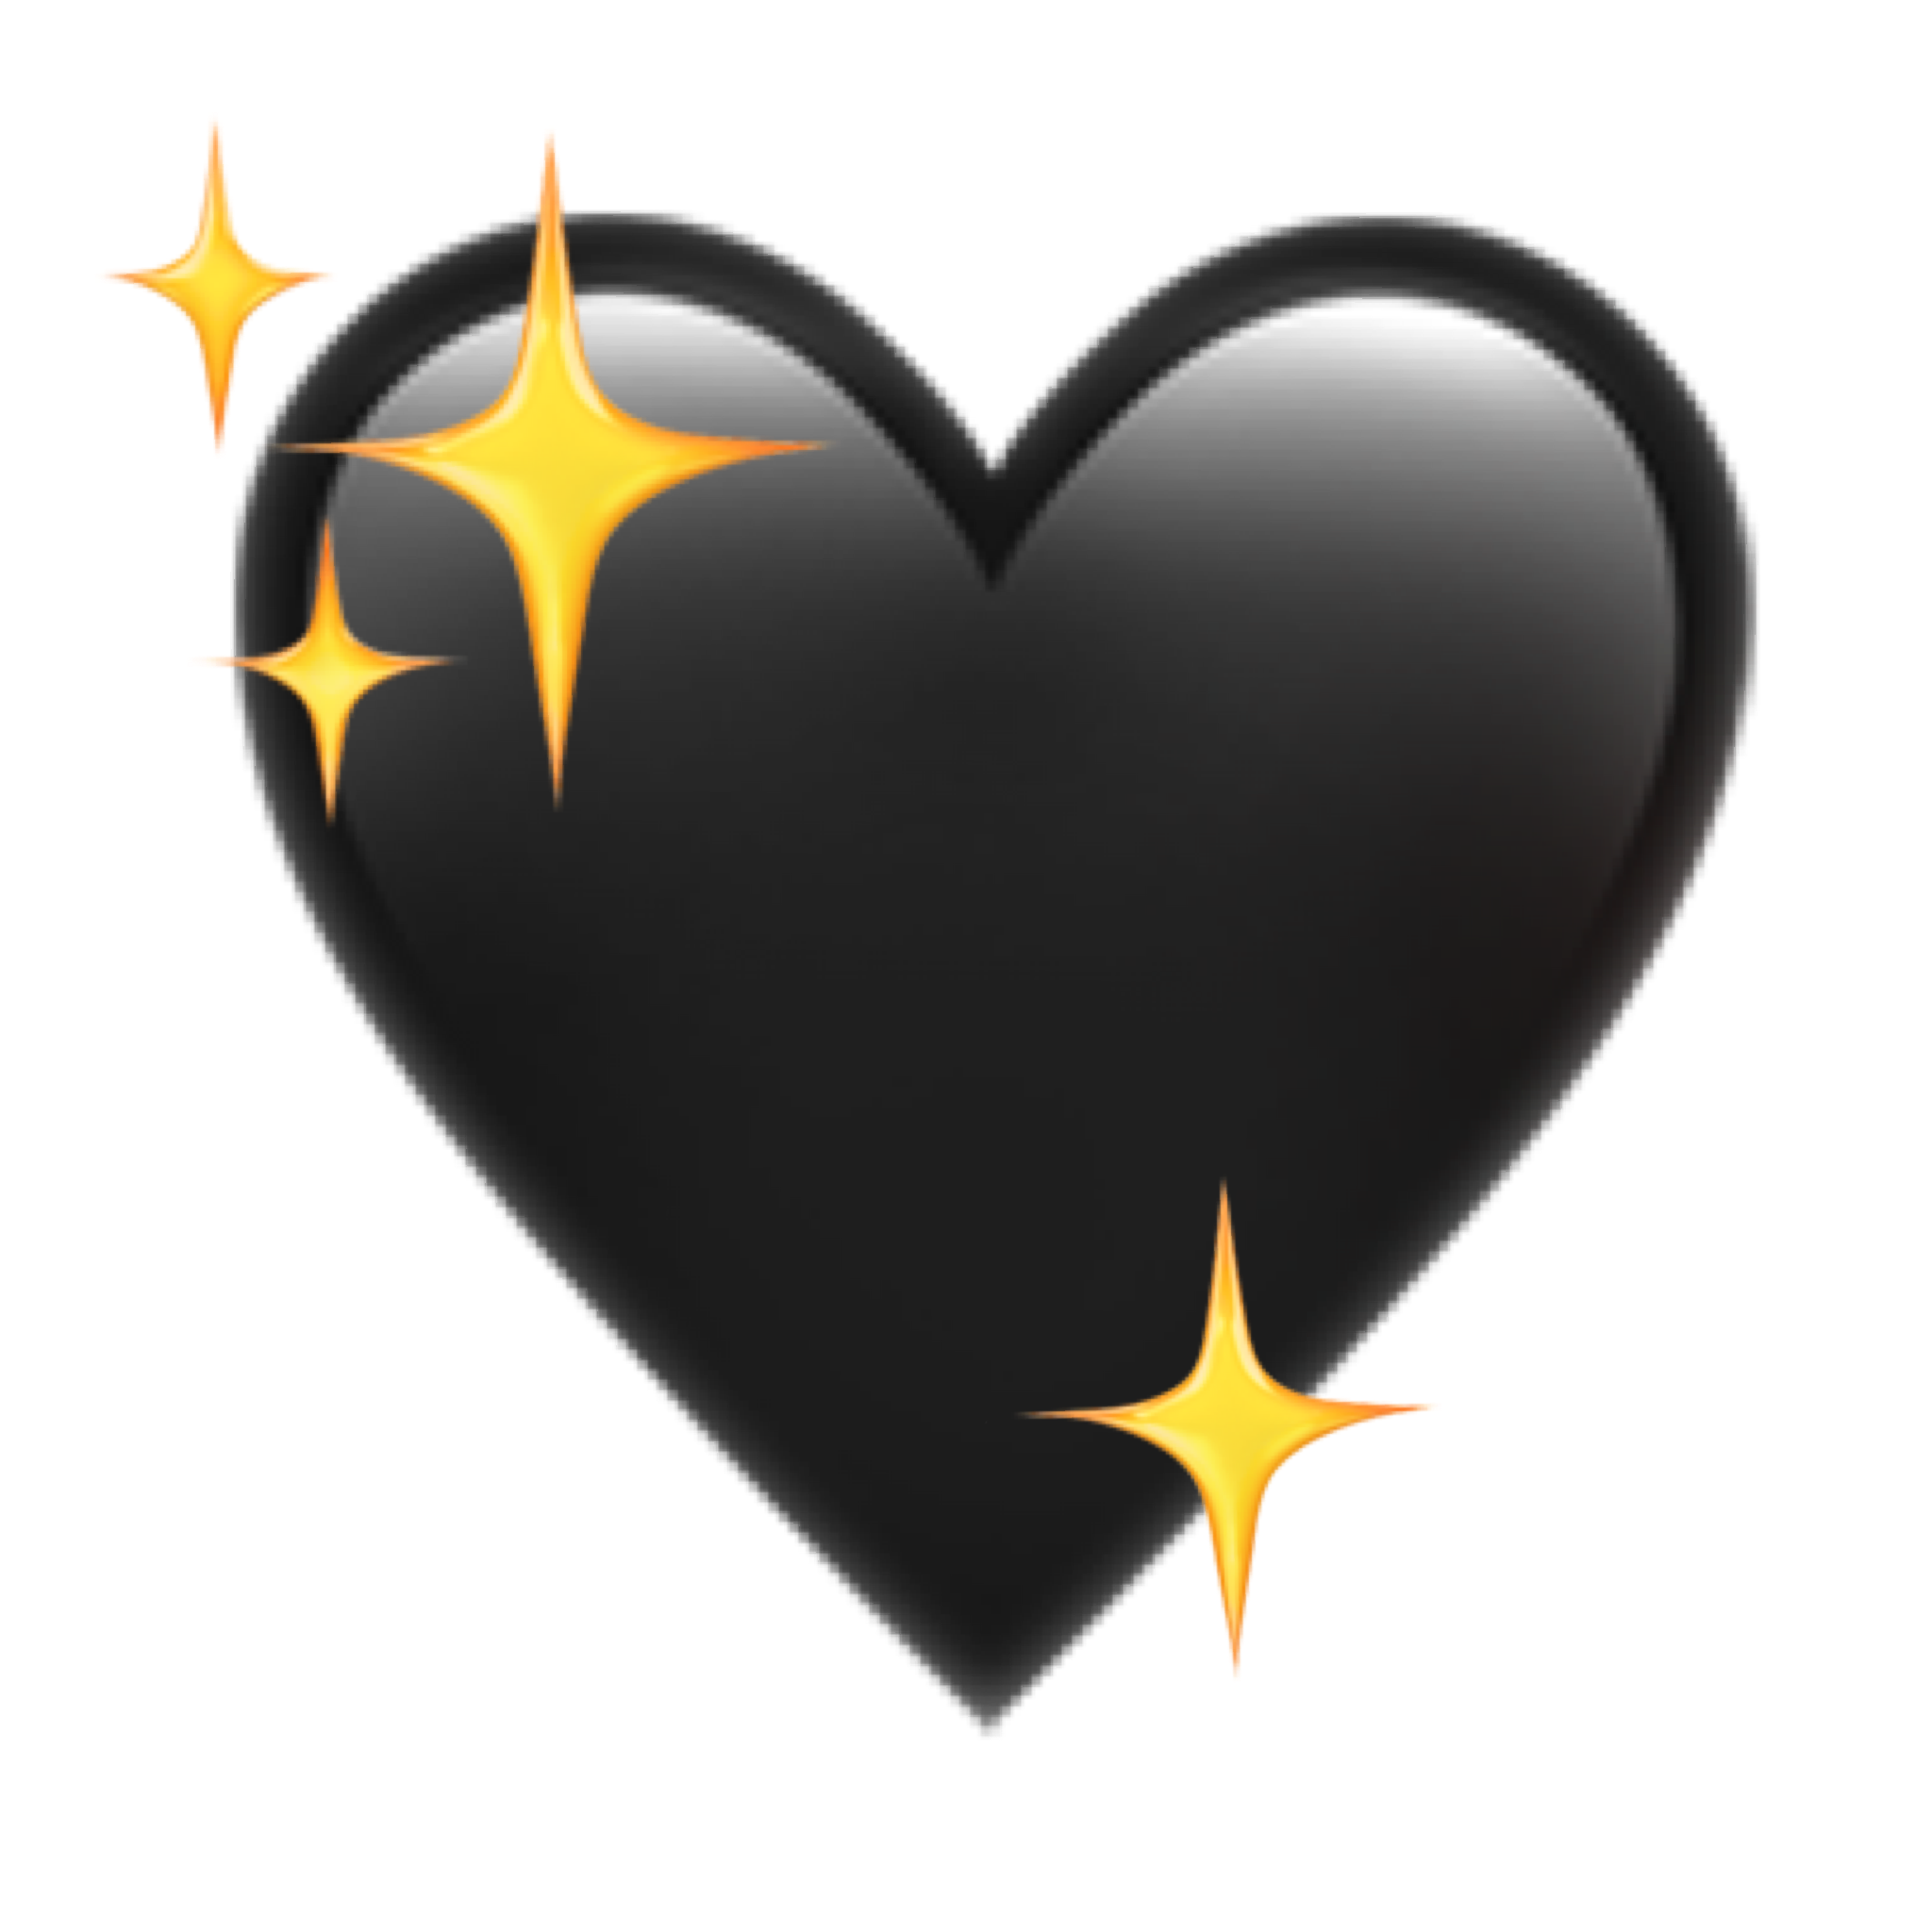 heart hearts sparkles yellow editing sticker by @chxrry-bqba